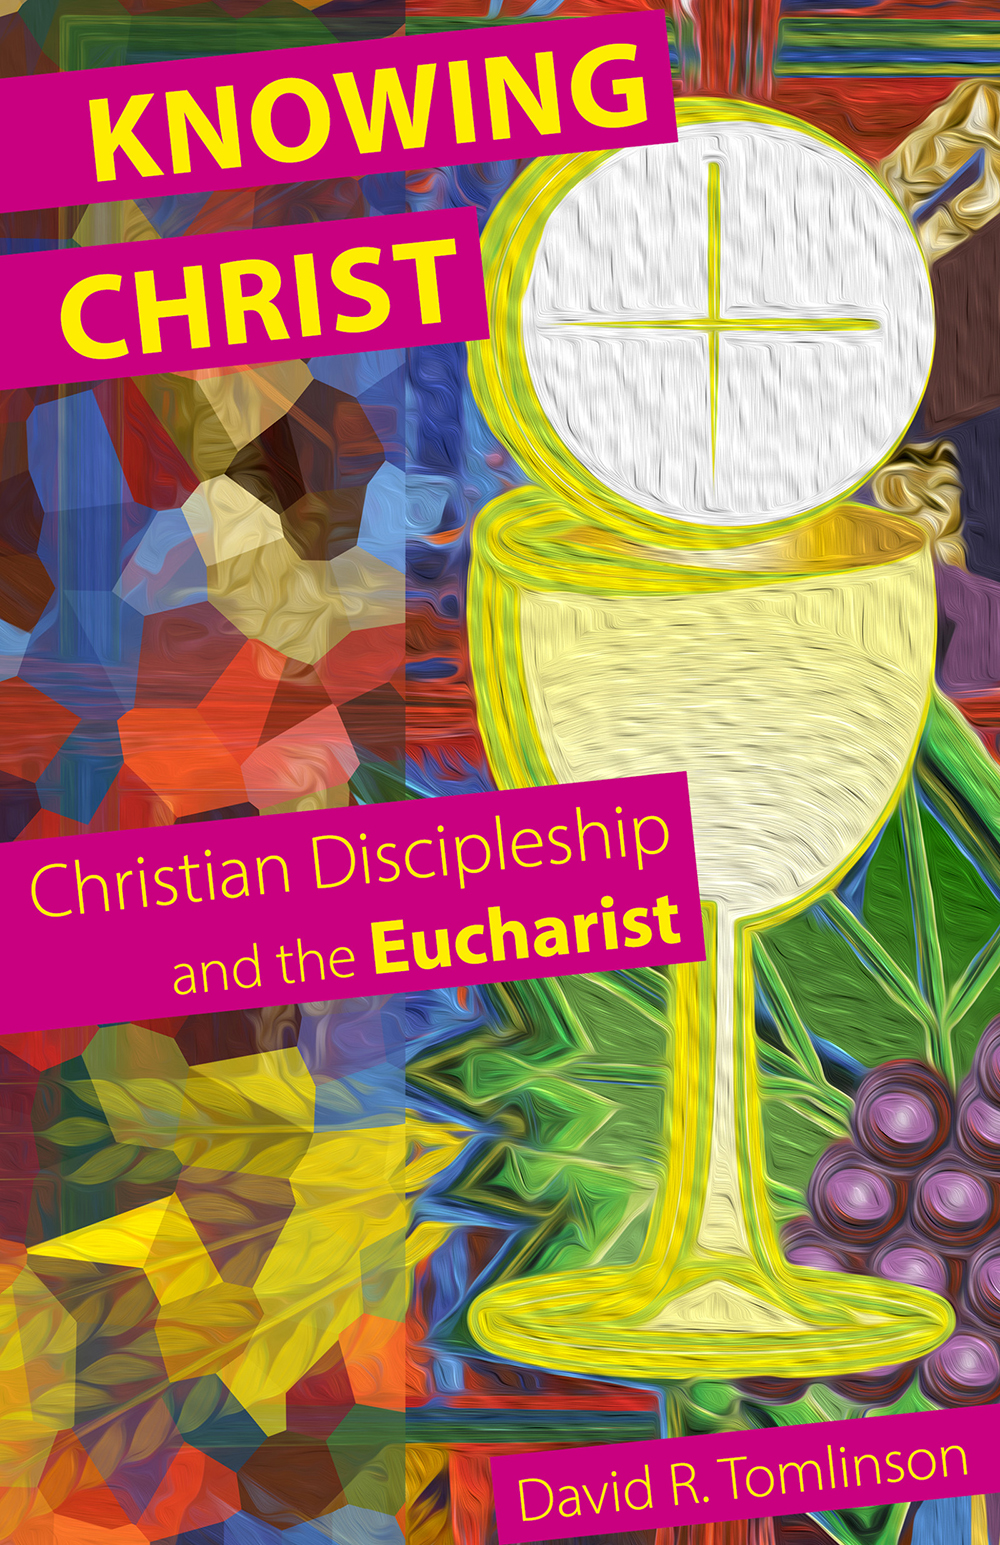 Knowing Christ – Christian Discipleship and the Eucharist